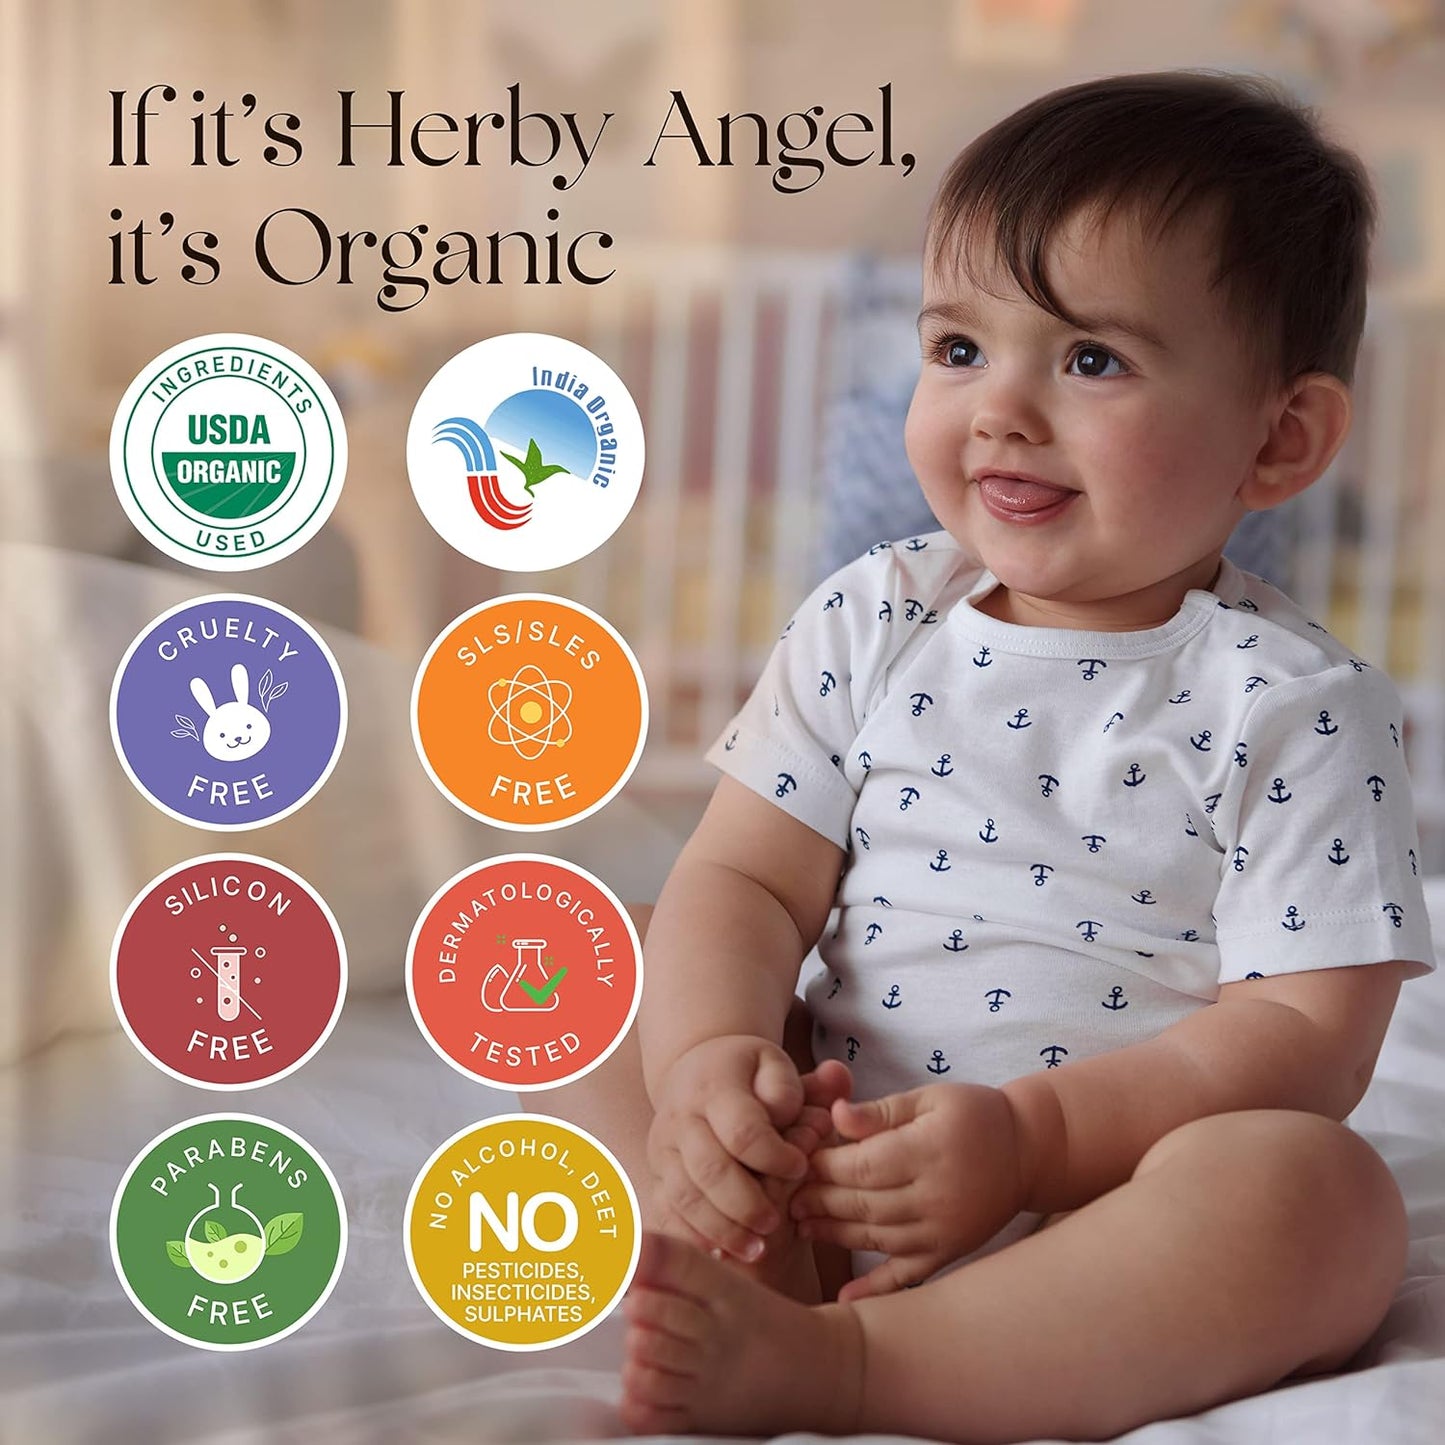 Herby Angel Ultra Gentle Baby Face and Body Lotion